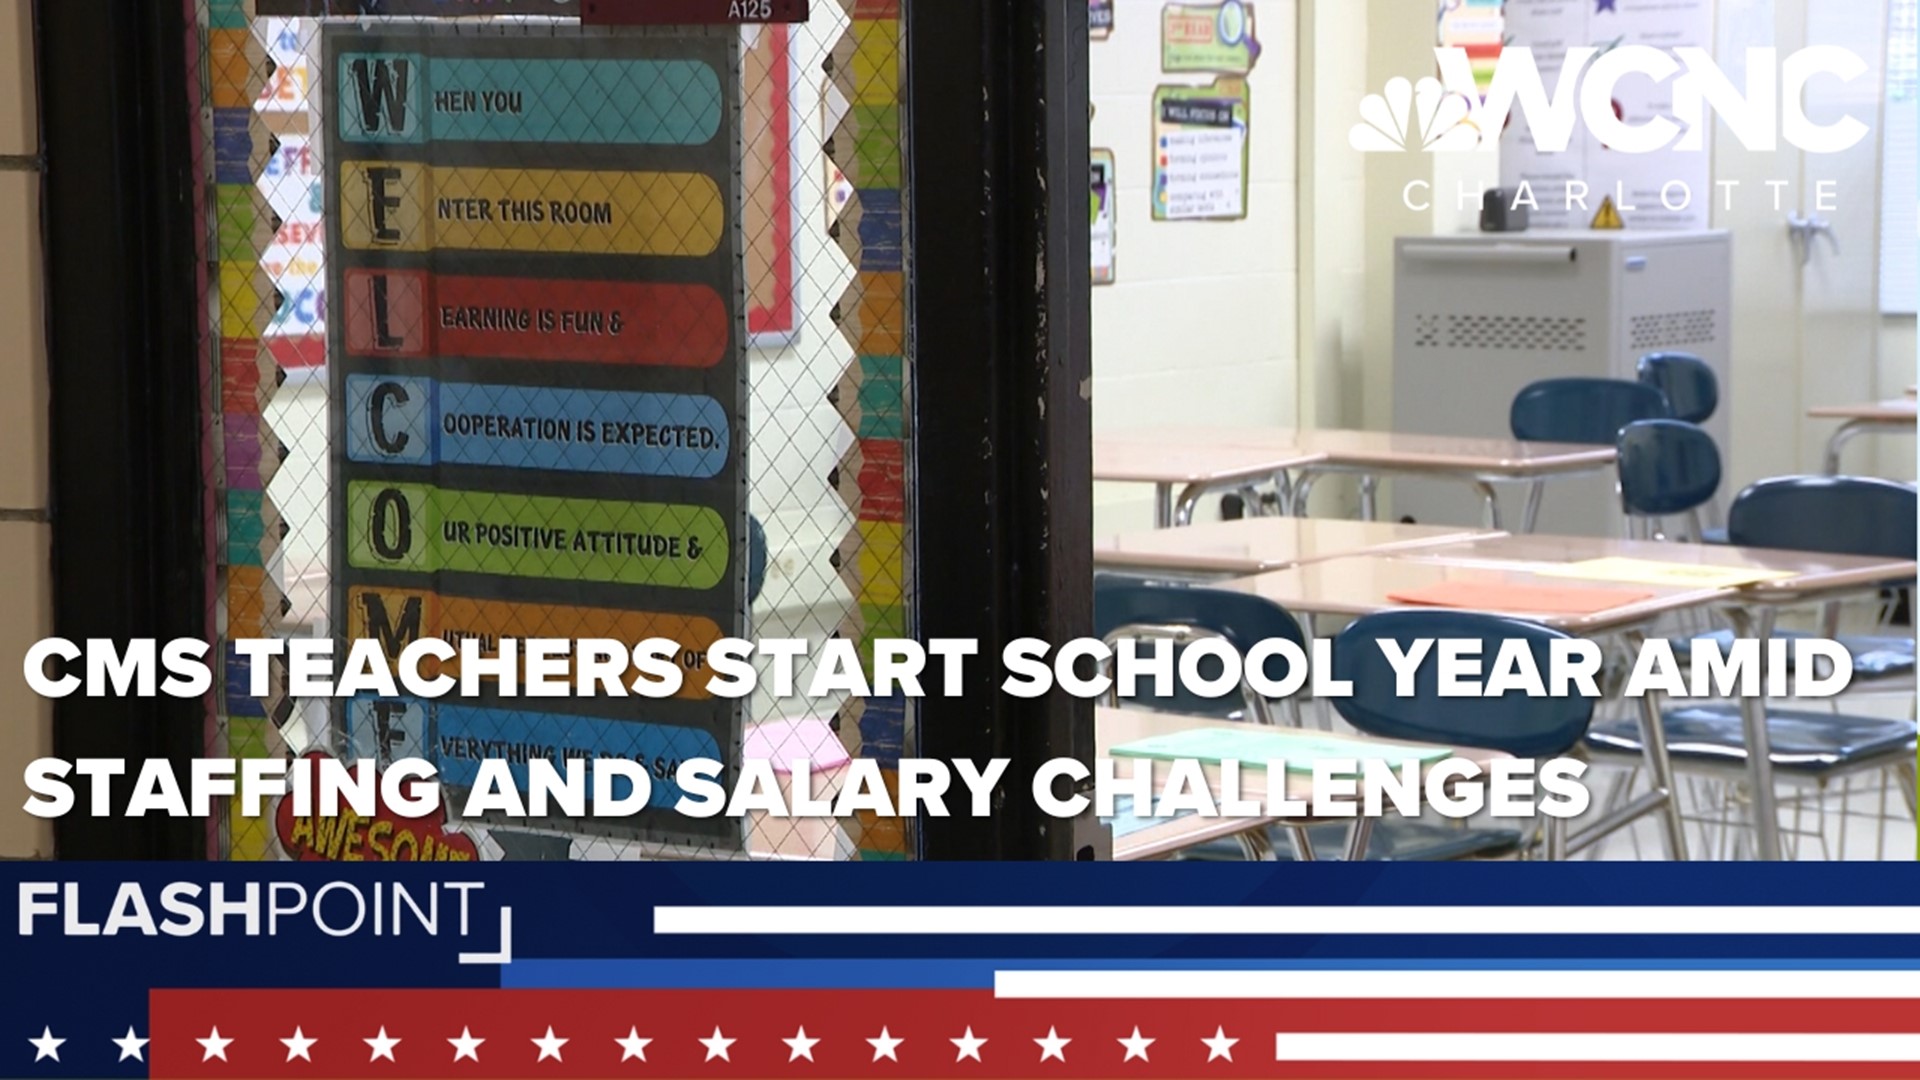 On Flashpoint, a teacher and CMS board member discuss teacher shortages and pay raises.